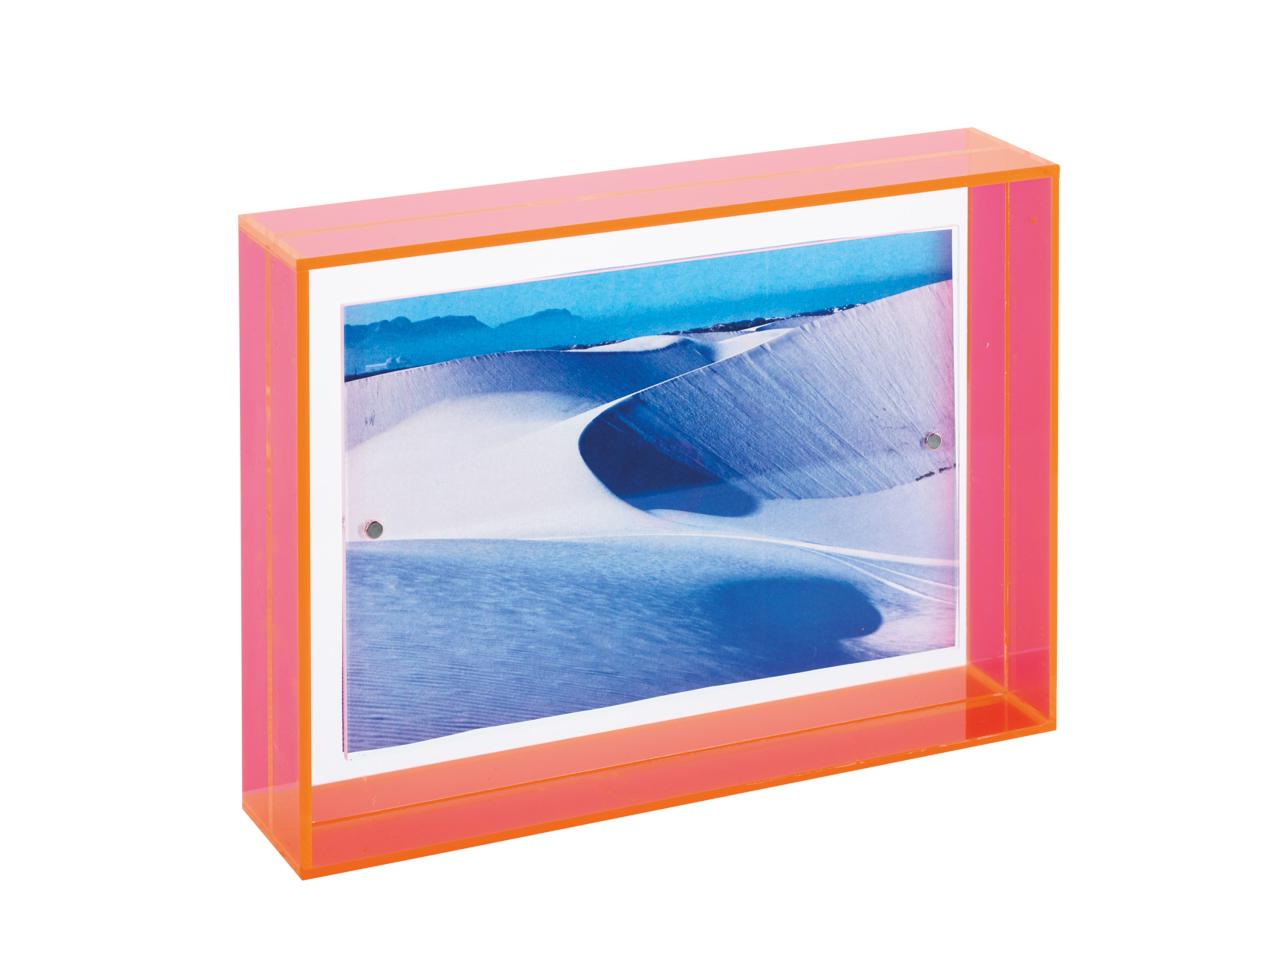 Melinera Acrylic Picture Frames1